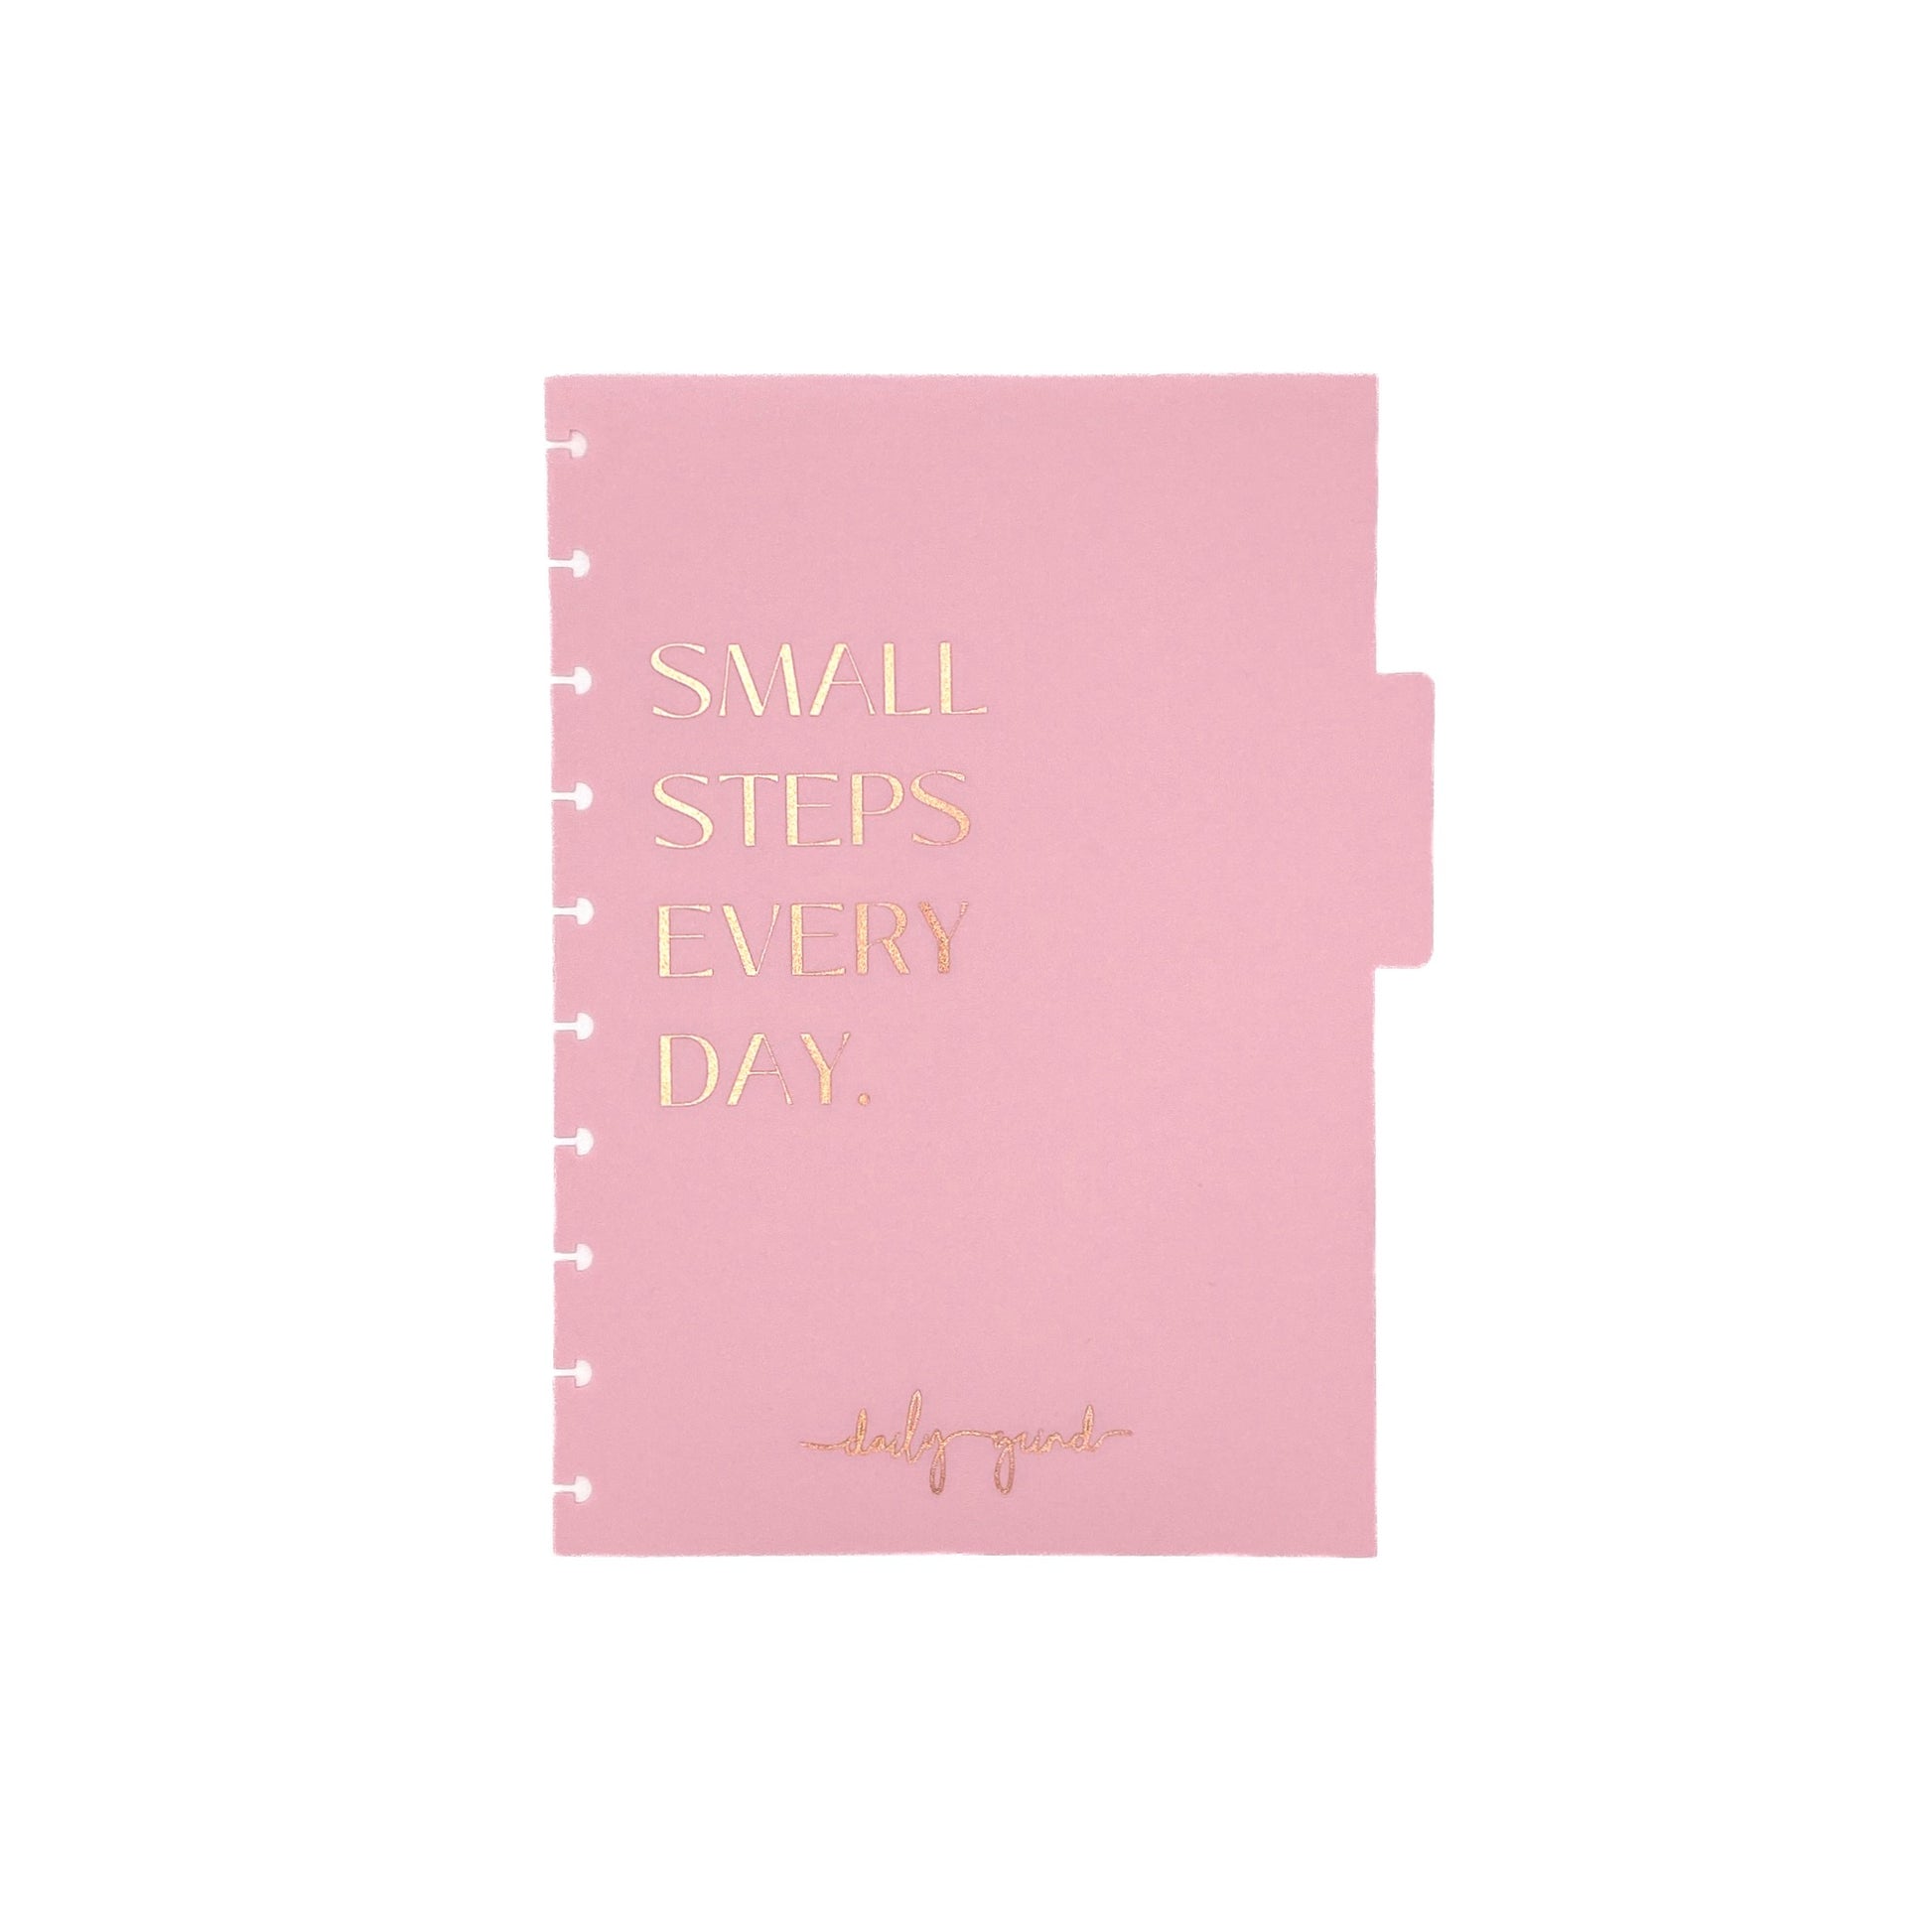 "Small steps every day" pink planner divider